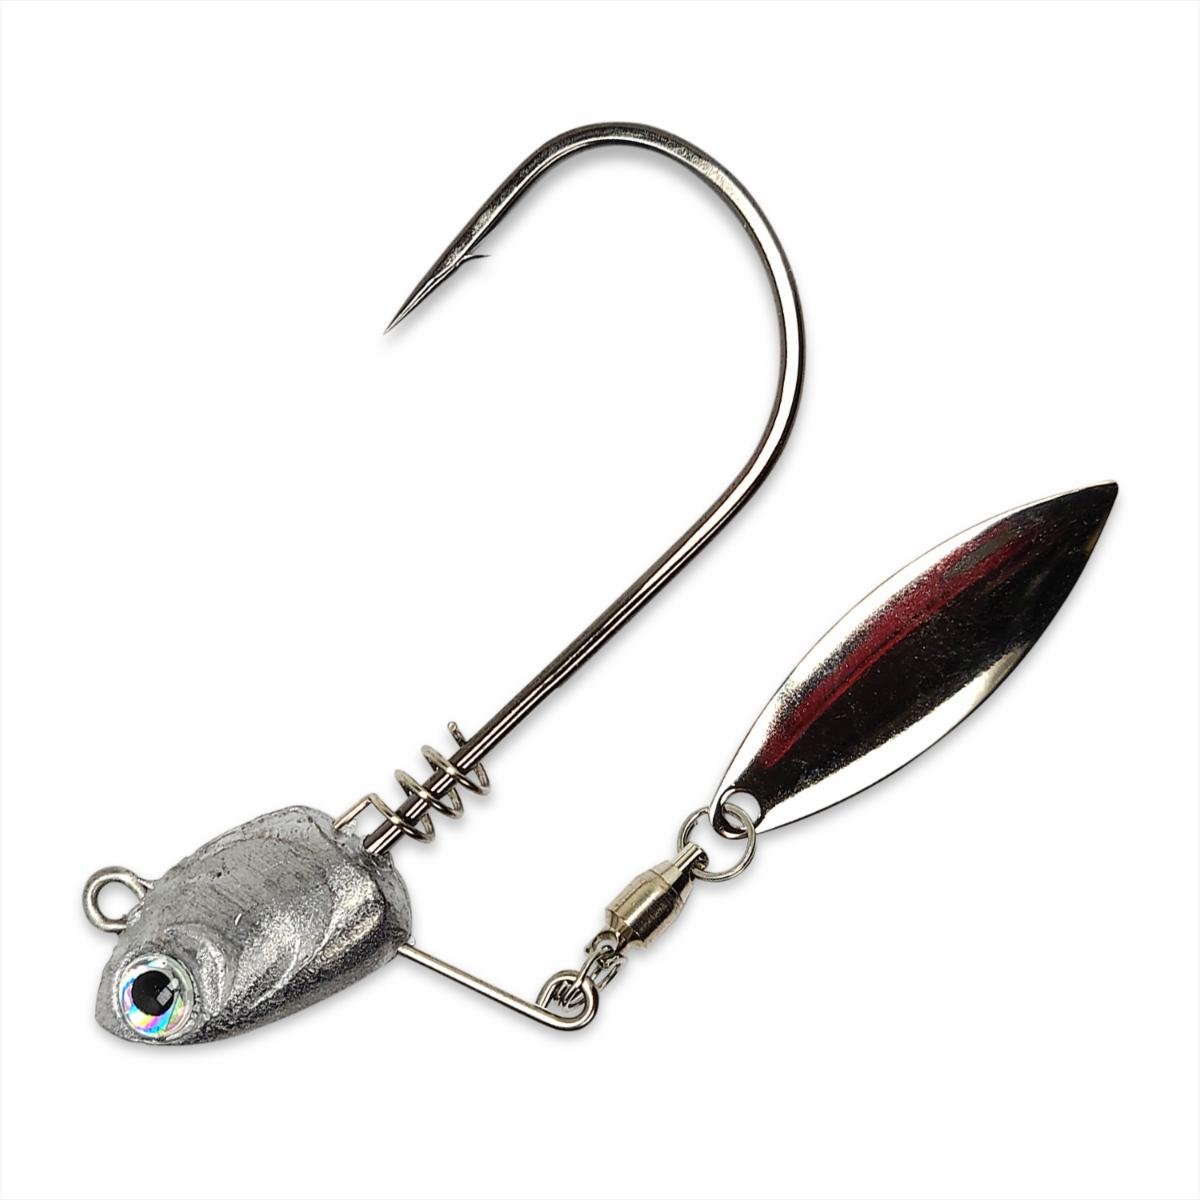 Perfection Lures Sure Hook Up Perfection Lures 3/16 oz Shaky Head Bass Lure  - Black 